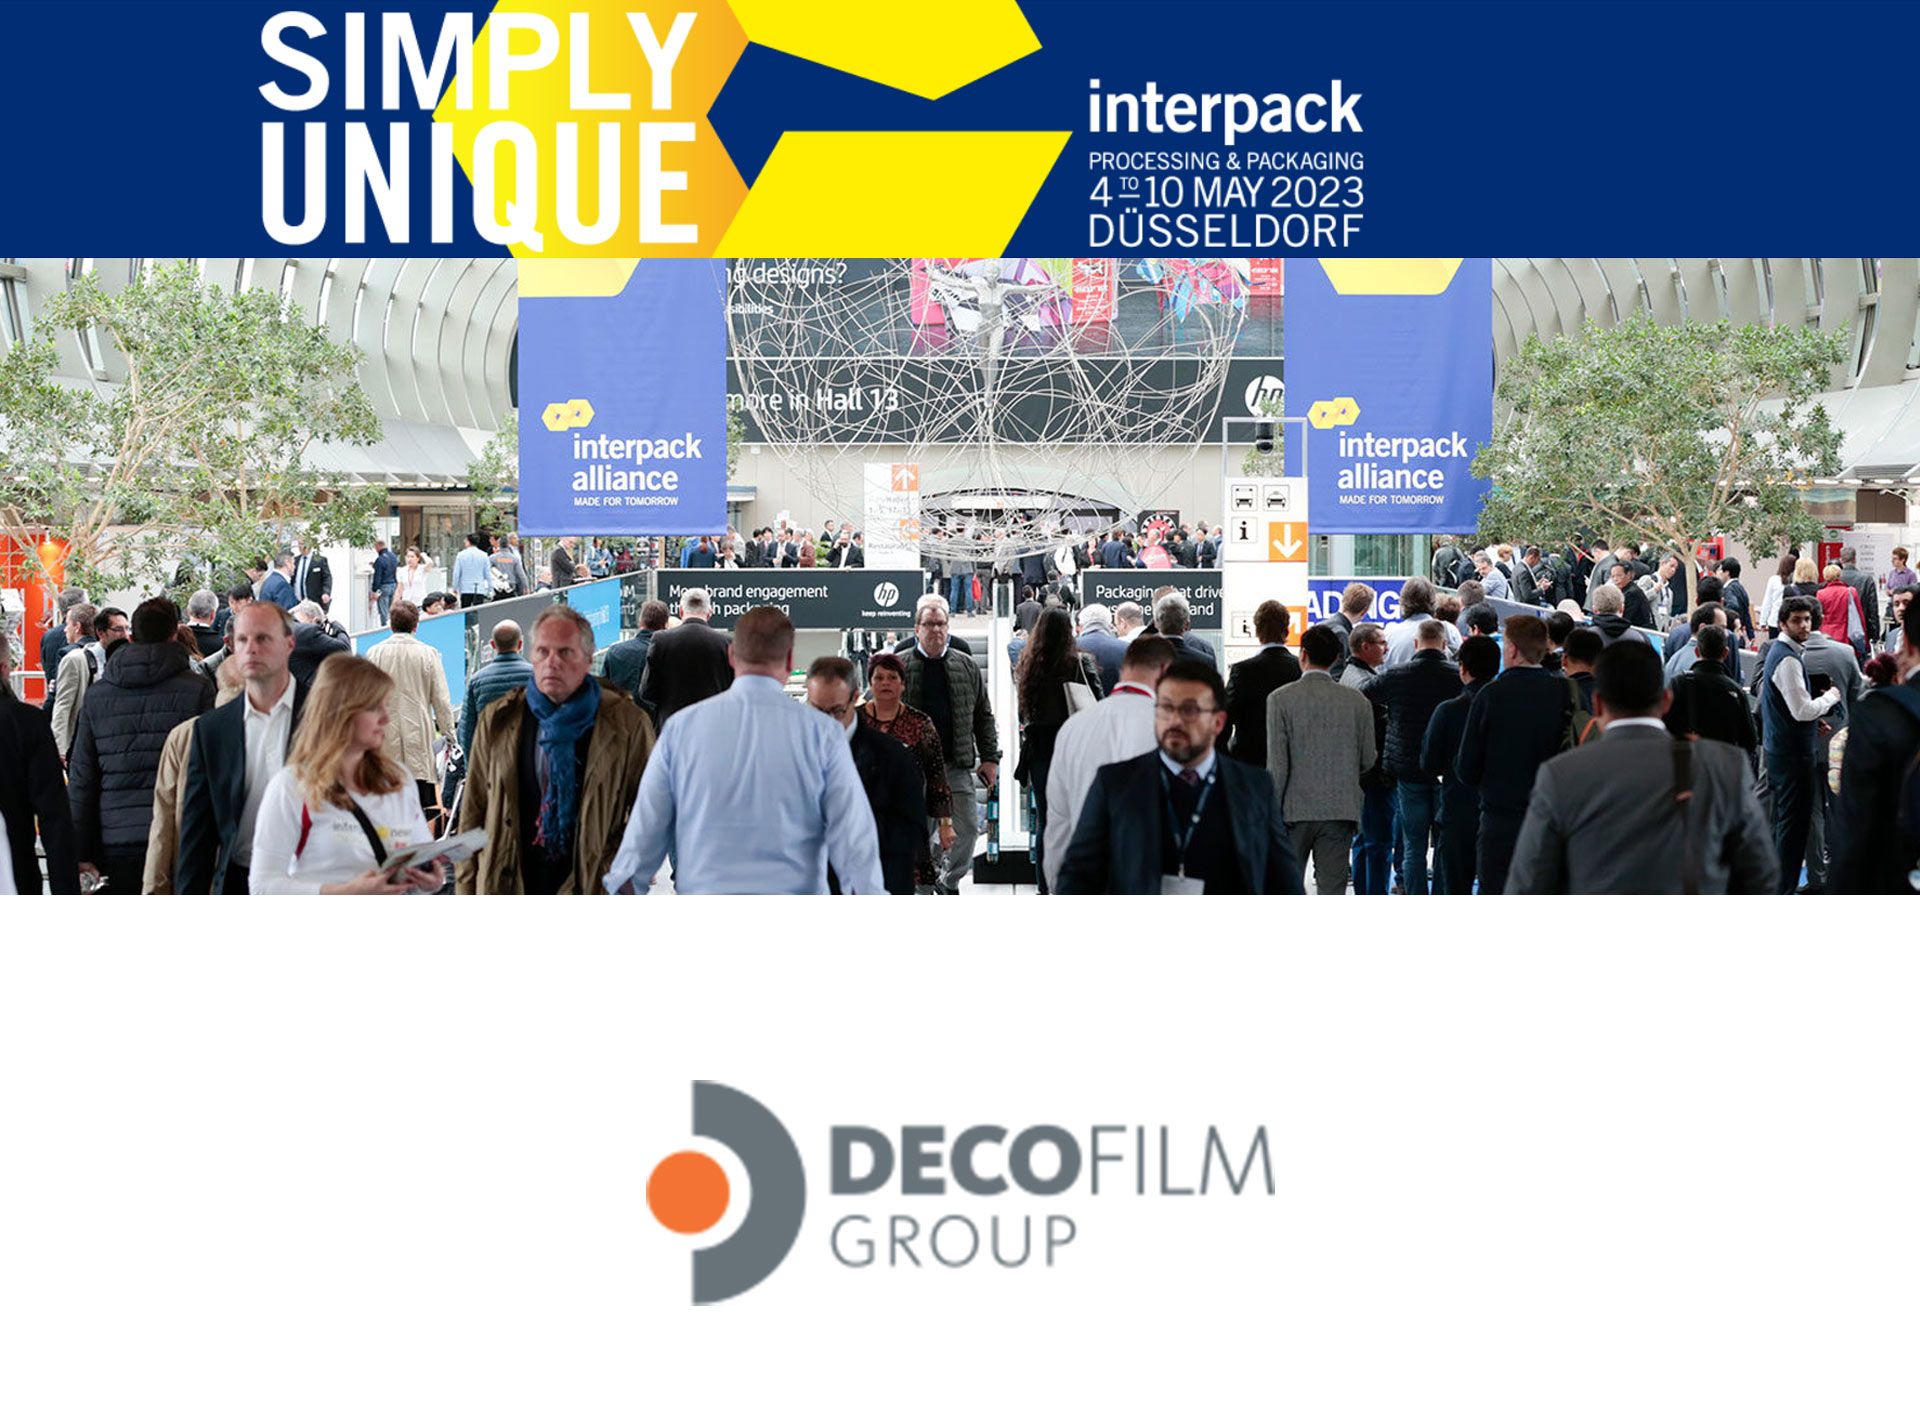 Ready for Interpack? Decofilm is.